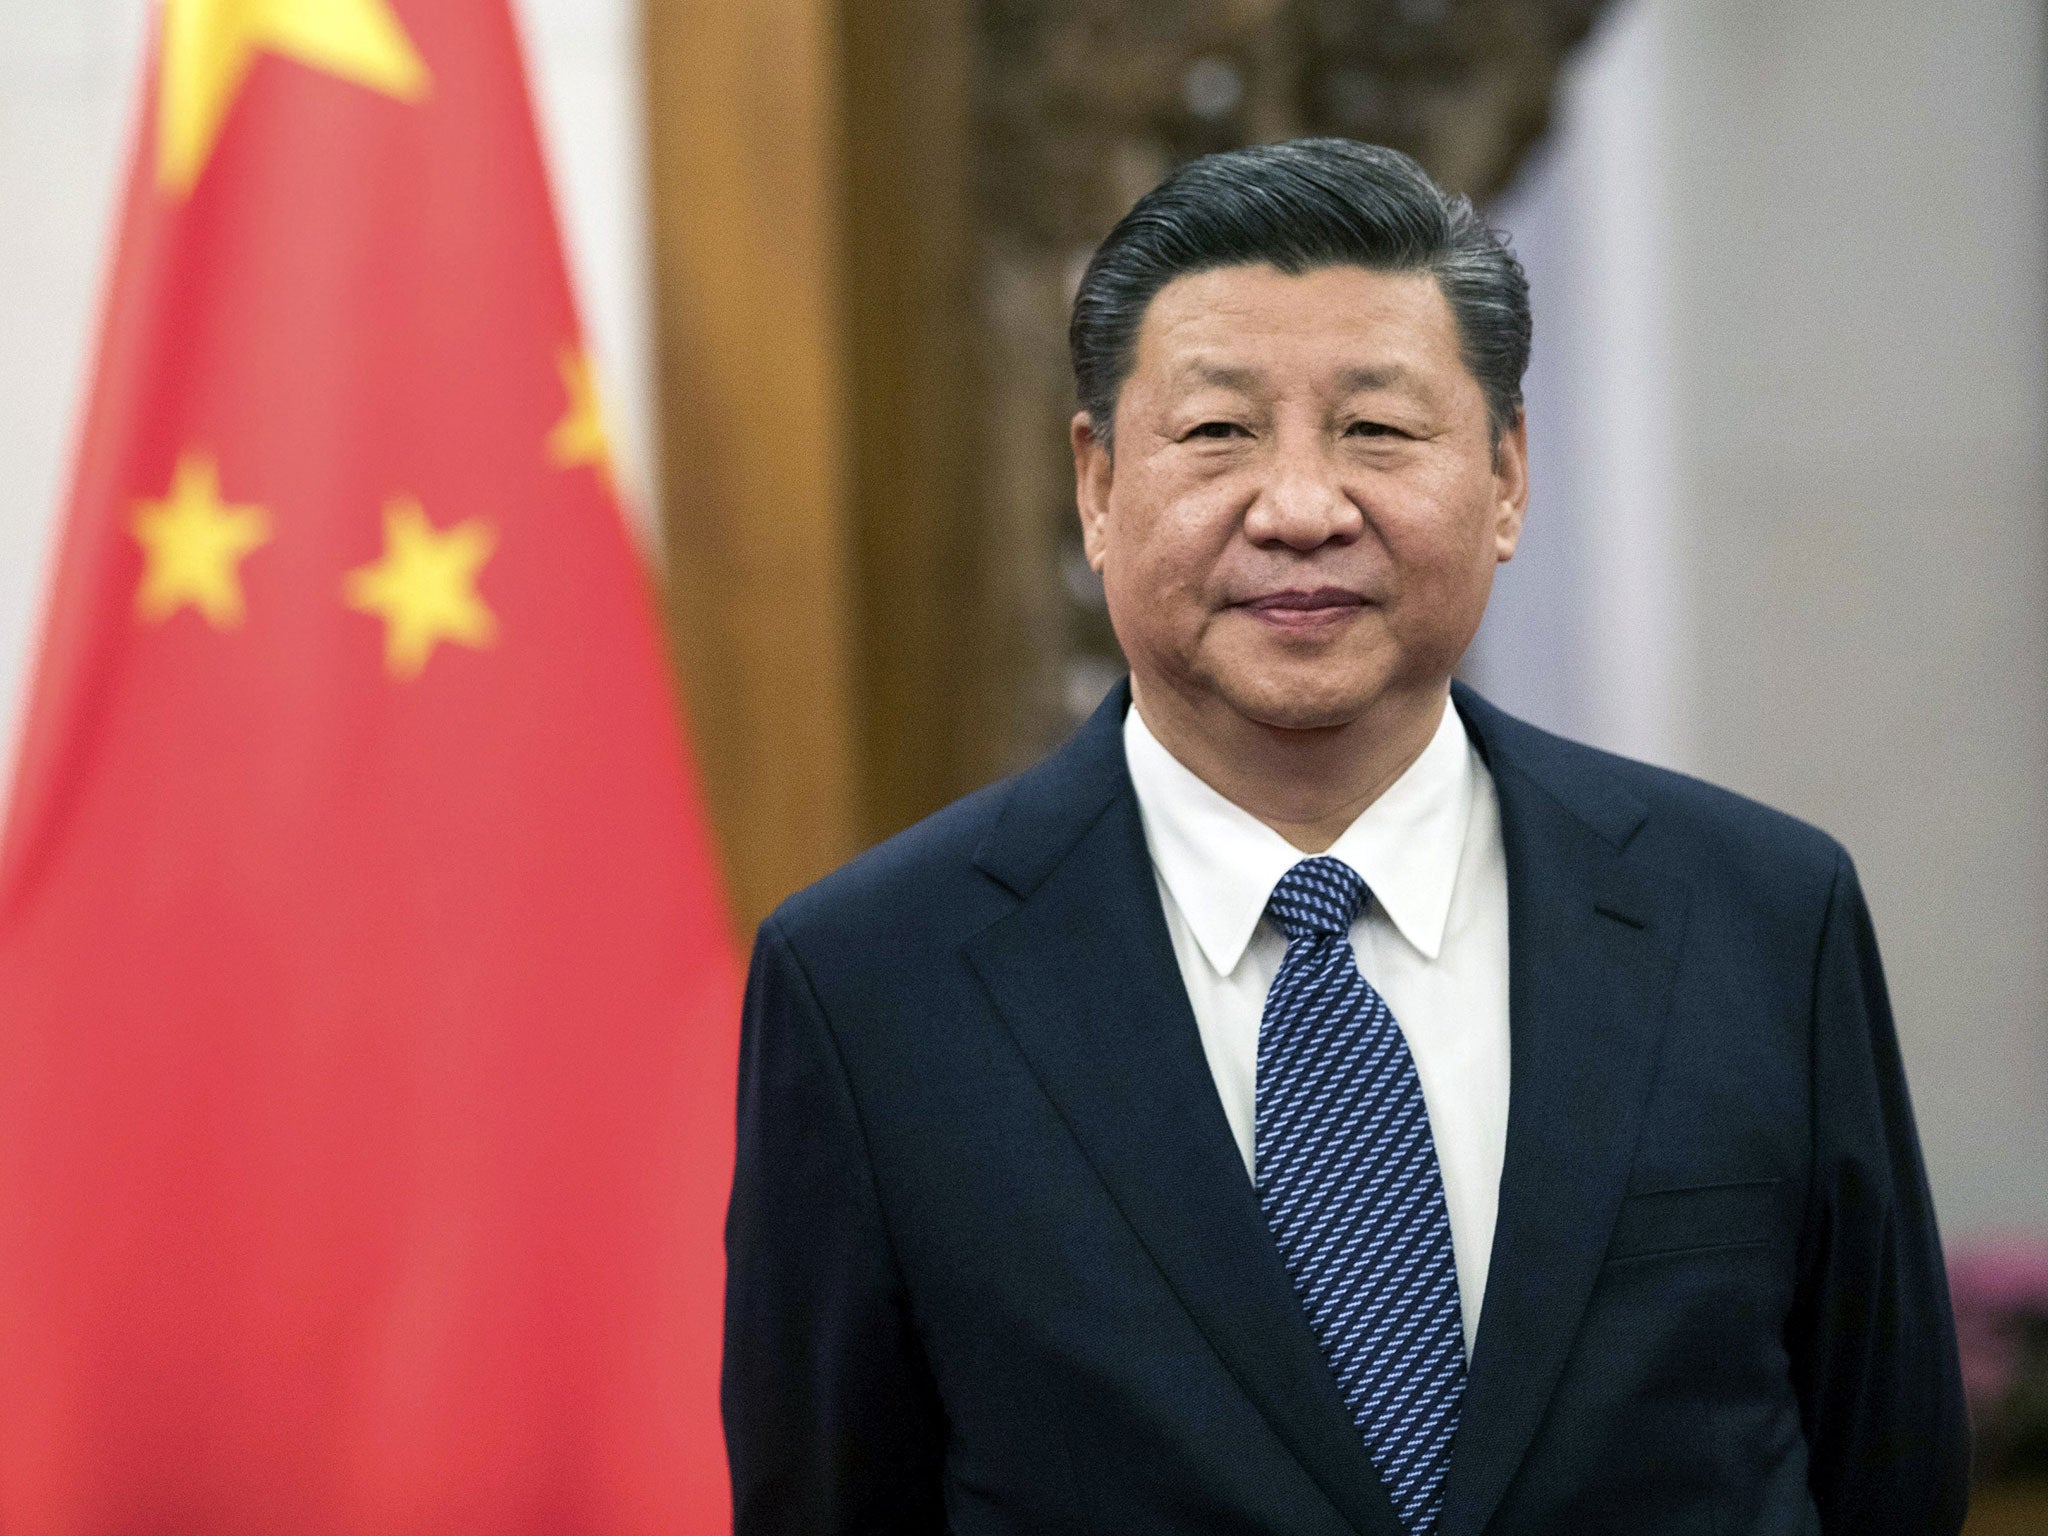 Nearing the end of his first five-year term, under current rules Mr Xi must step down before the end of this second term